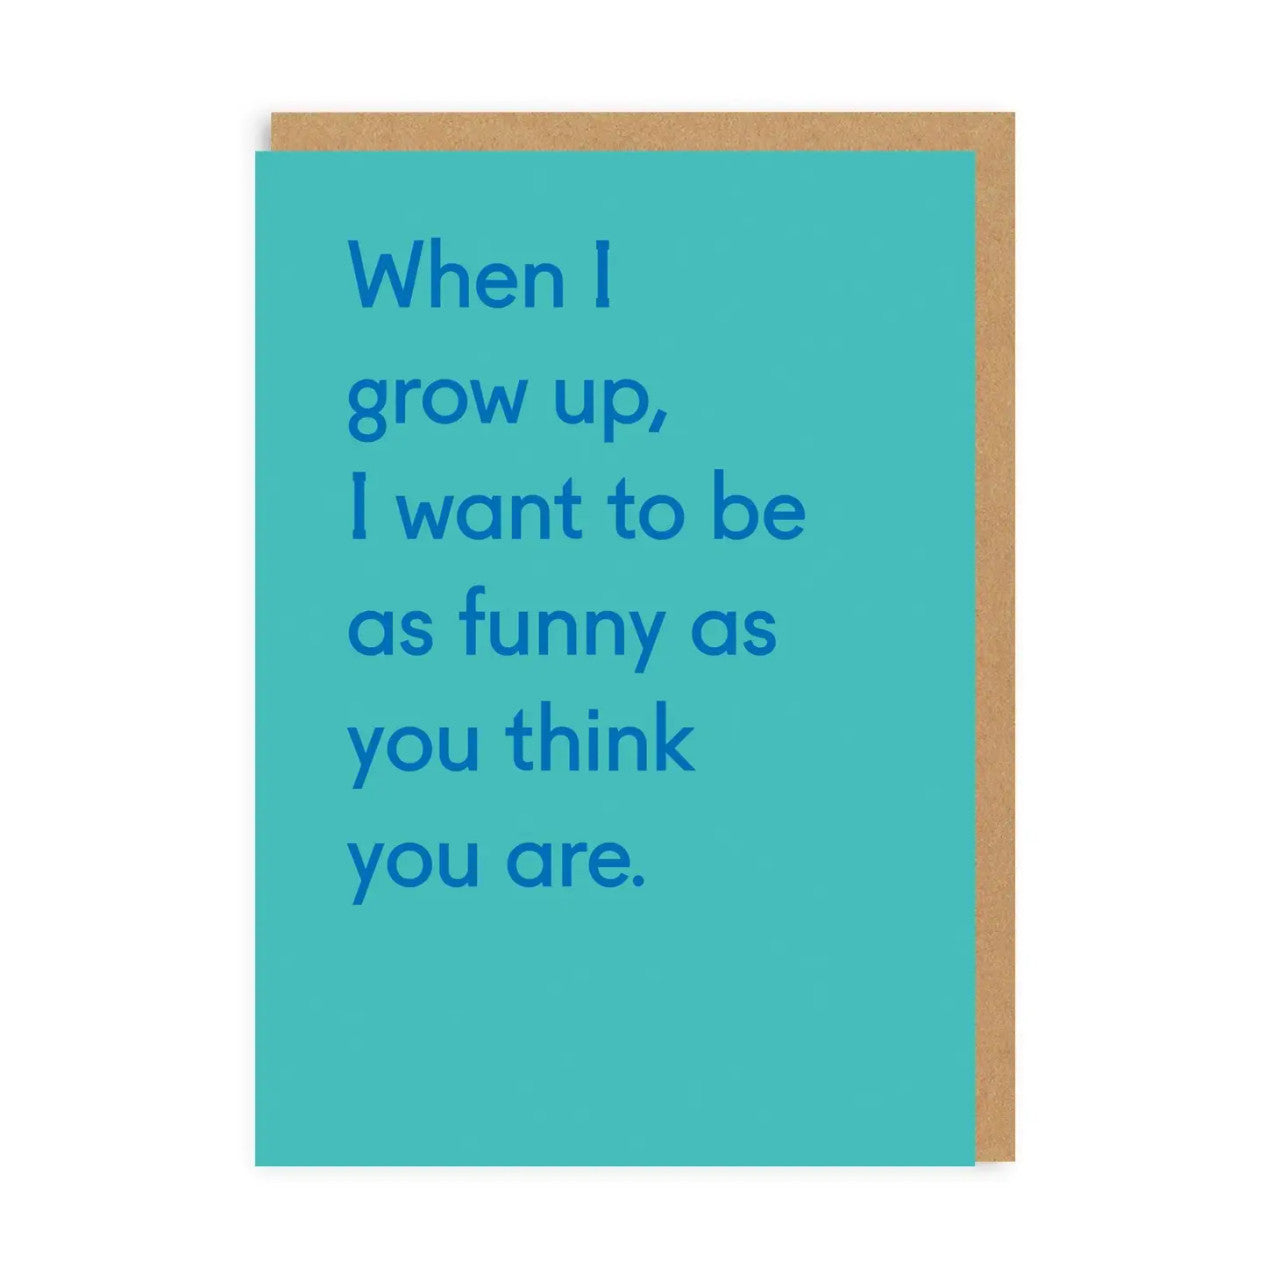 Birthday Card text reads "When I grow up, I want to be as funny as you think you are"